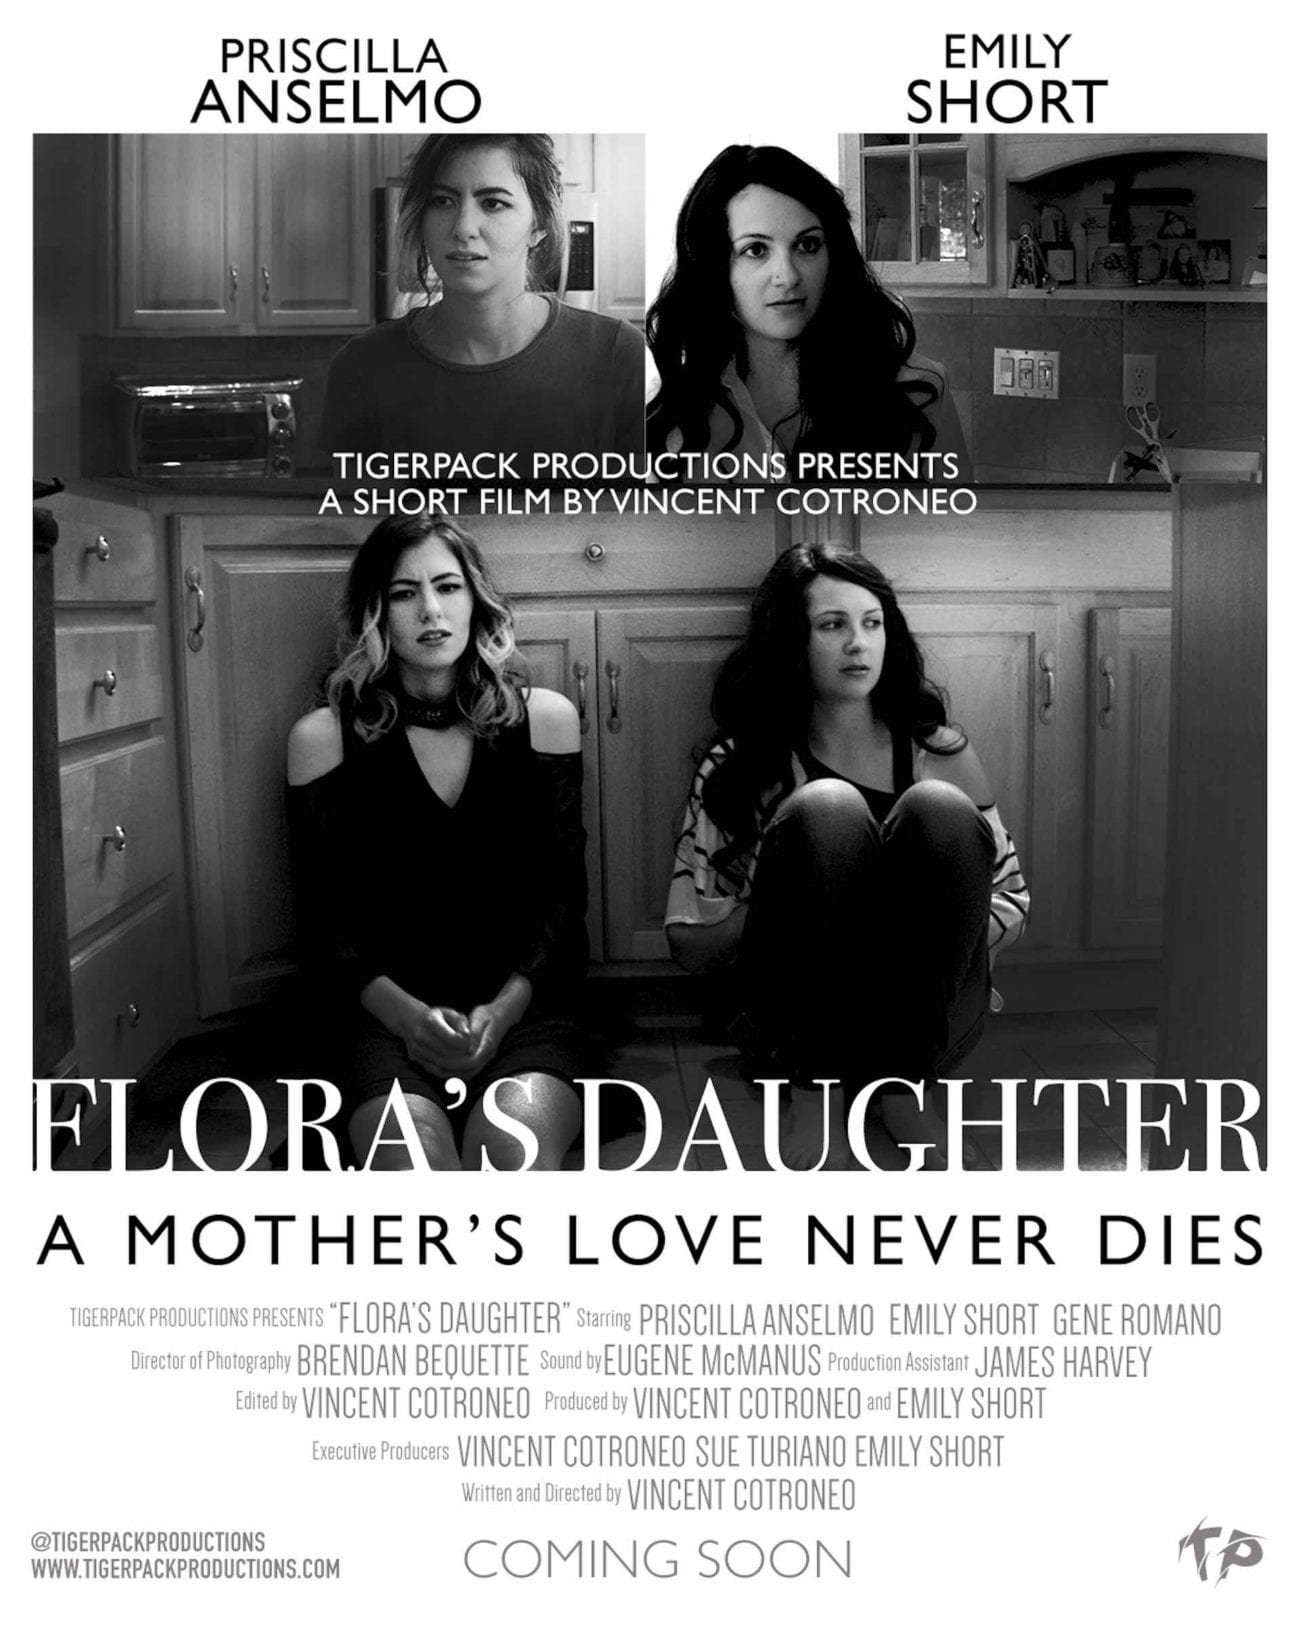 'Flora’s Daughter' is the newest passion project of the young production company Tigerpack Productions. Here's what we know about the noir thriller.